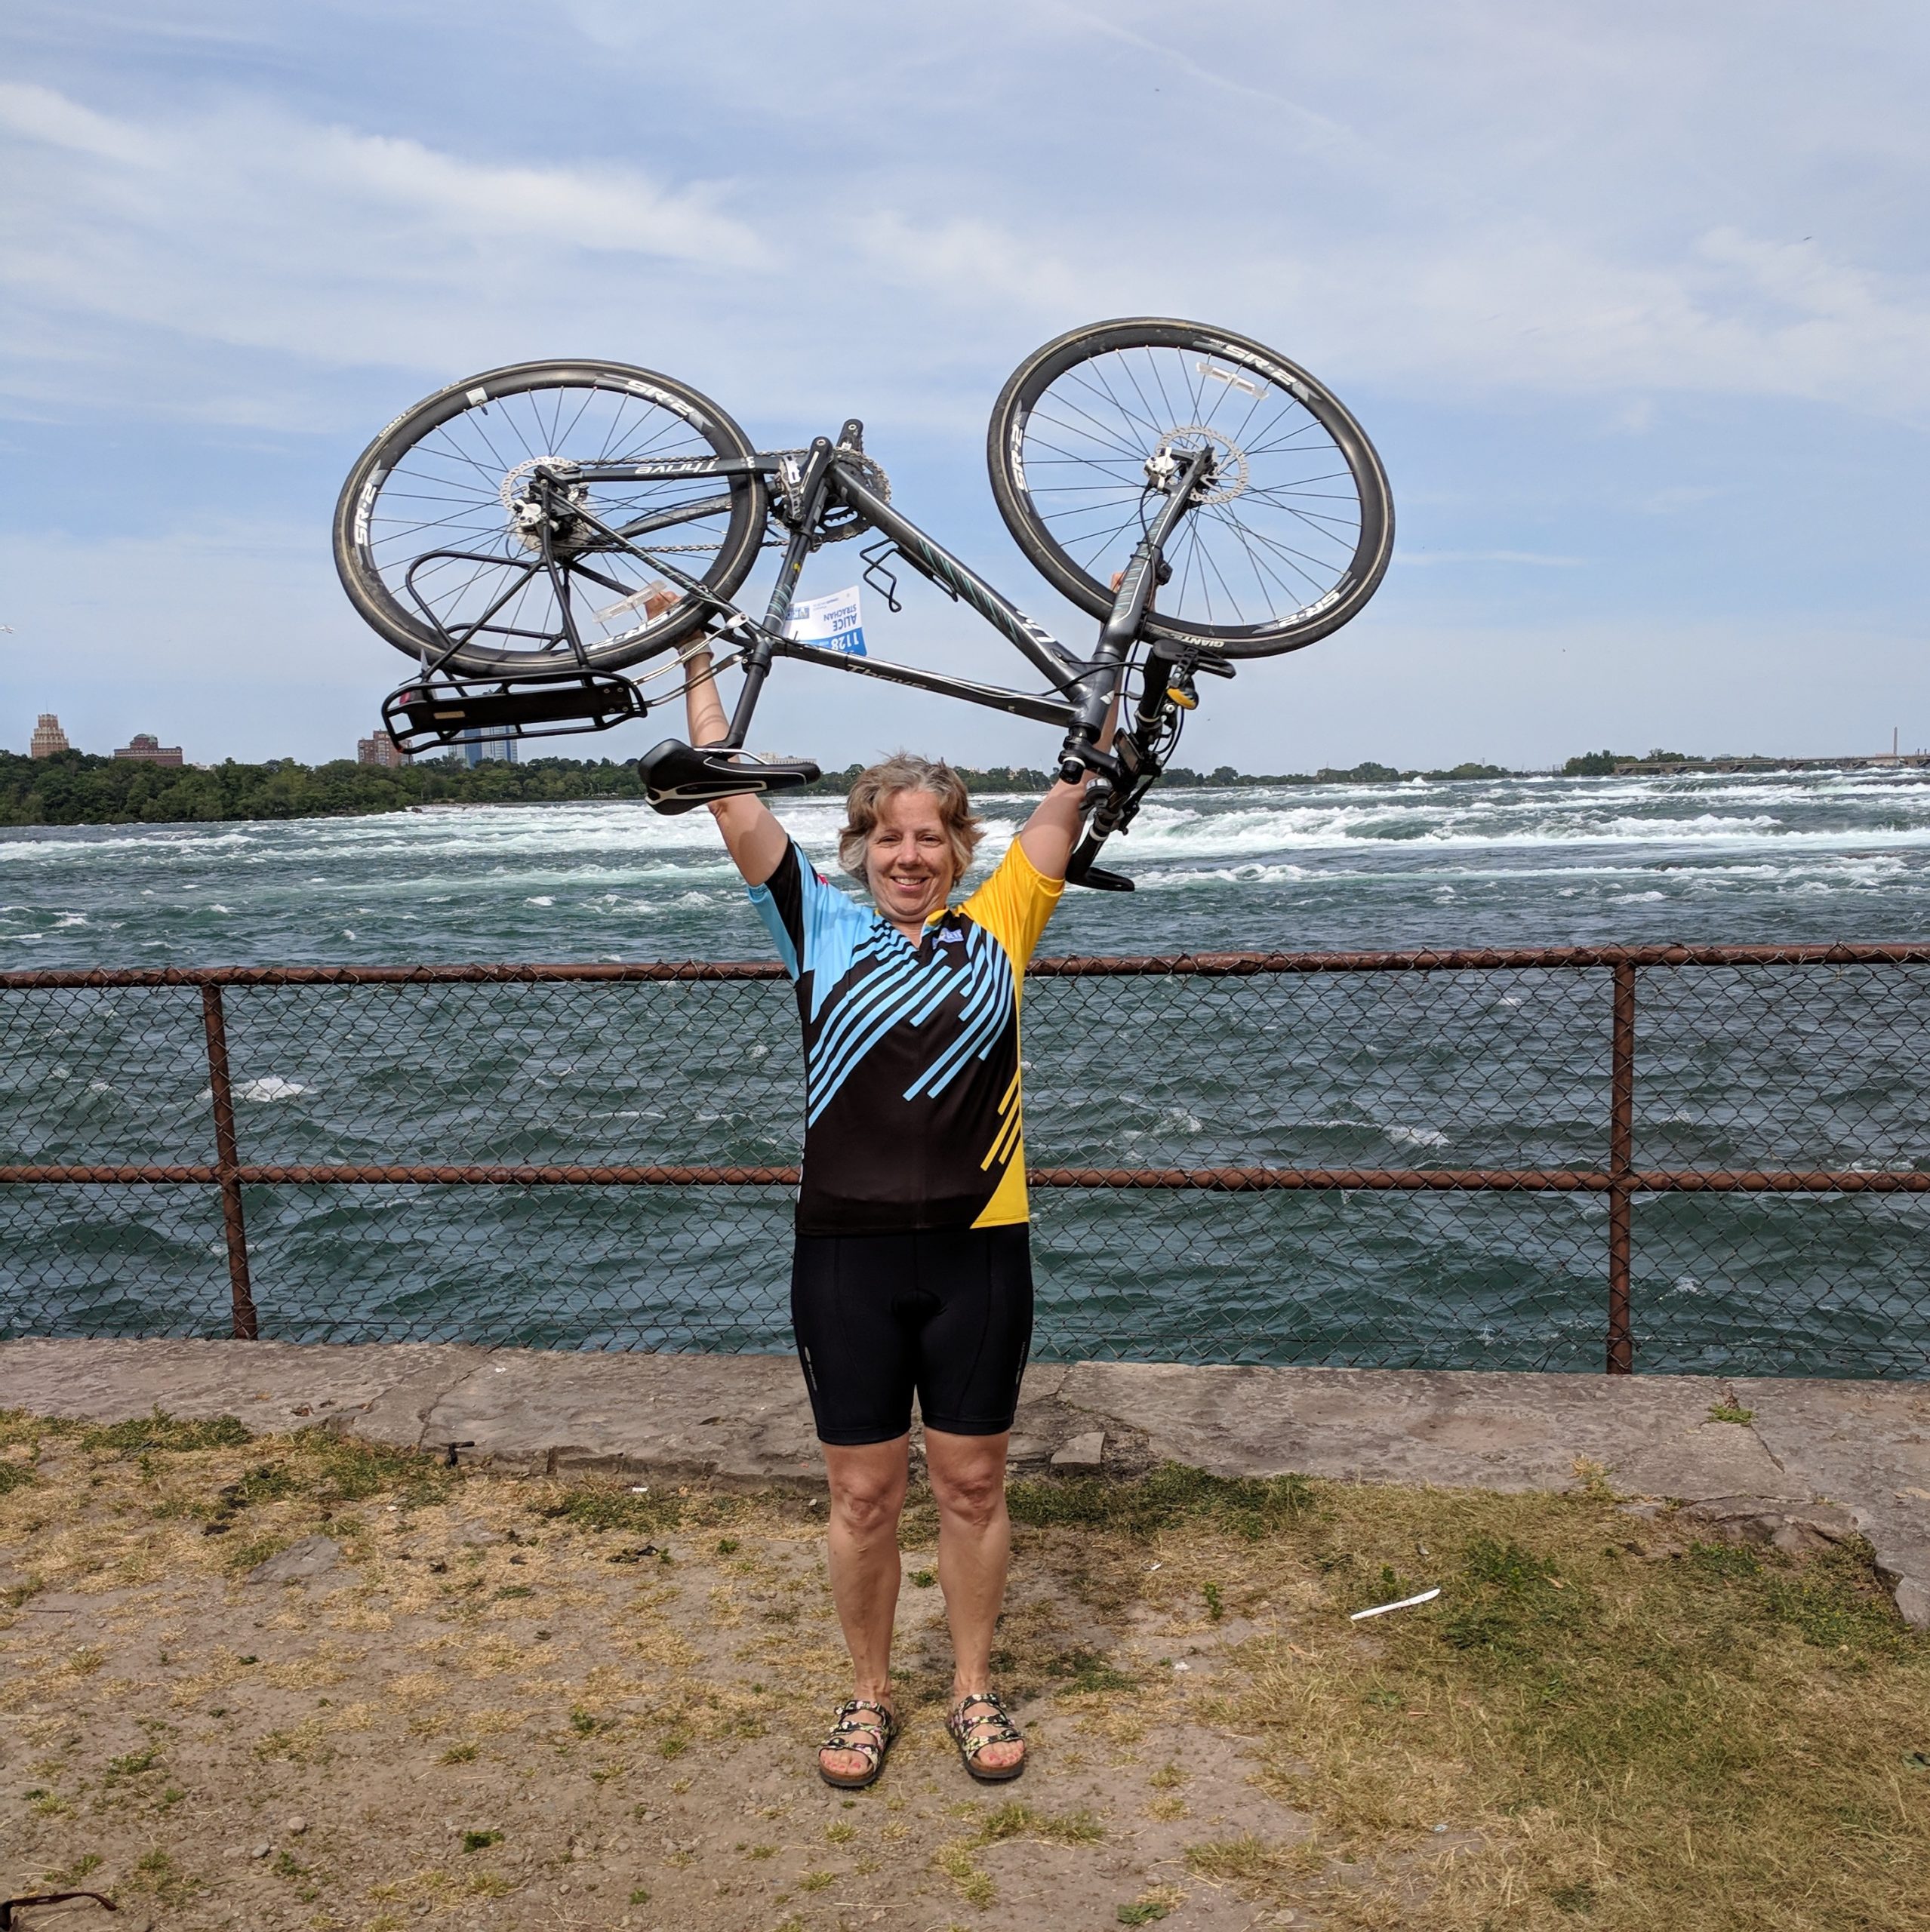 Alice Strachan strong-arming her bike at the close of the Ride to Conquer Cancer in Niagara Falls